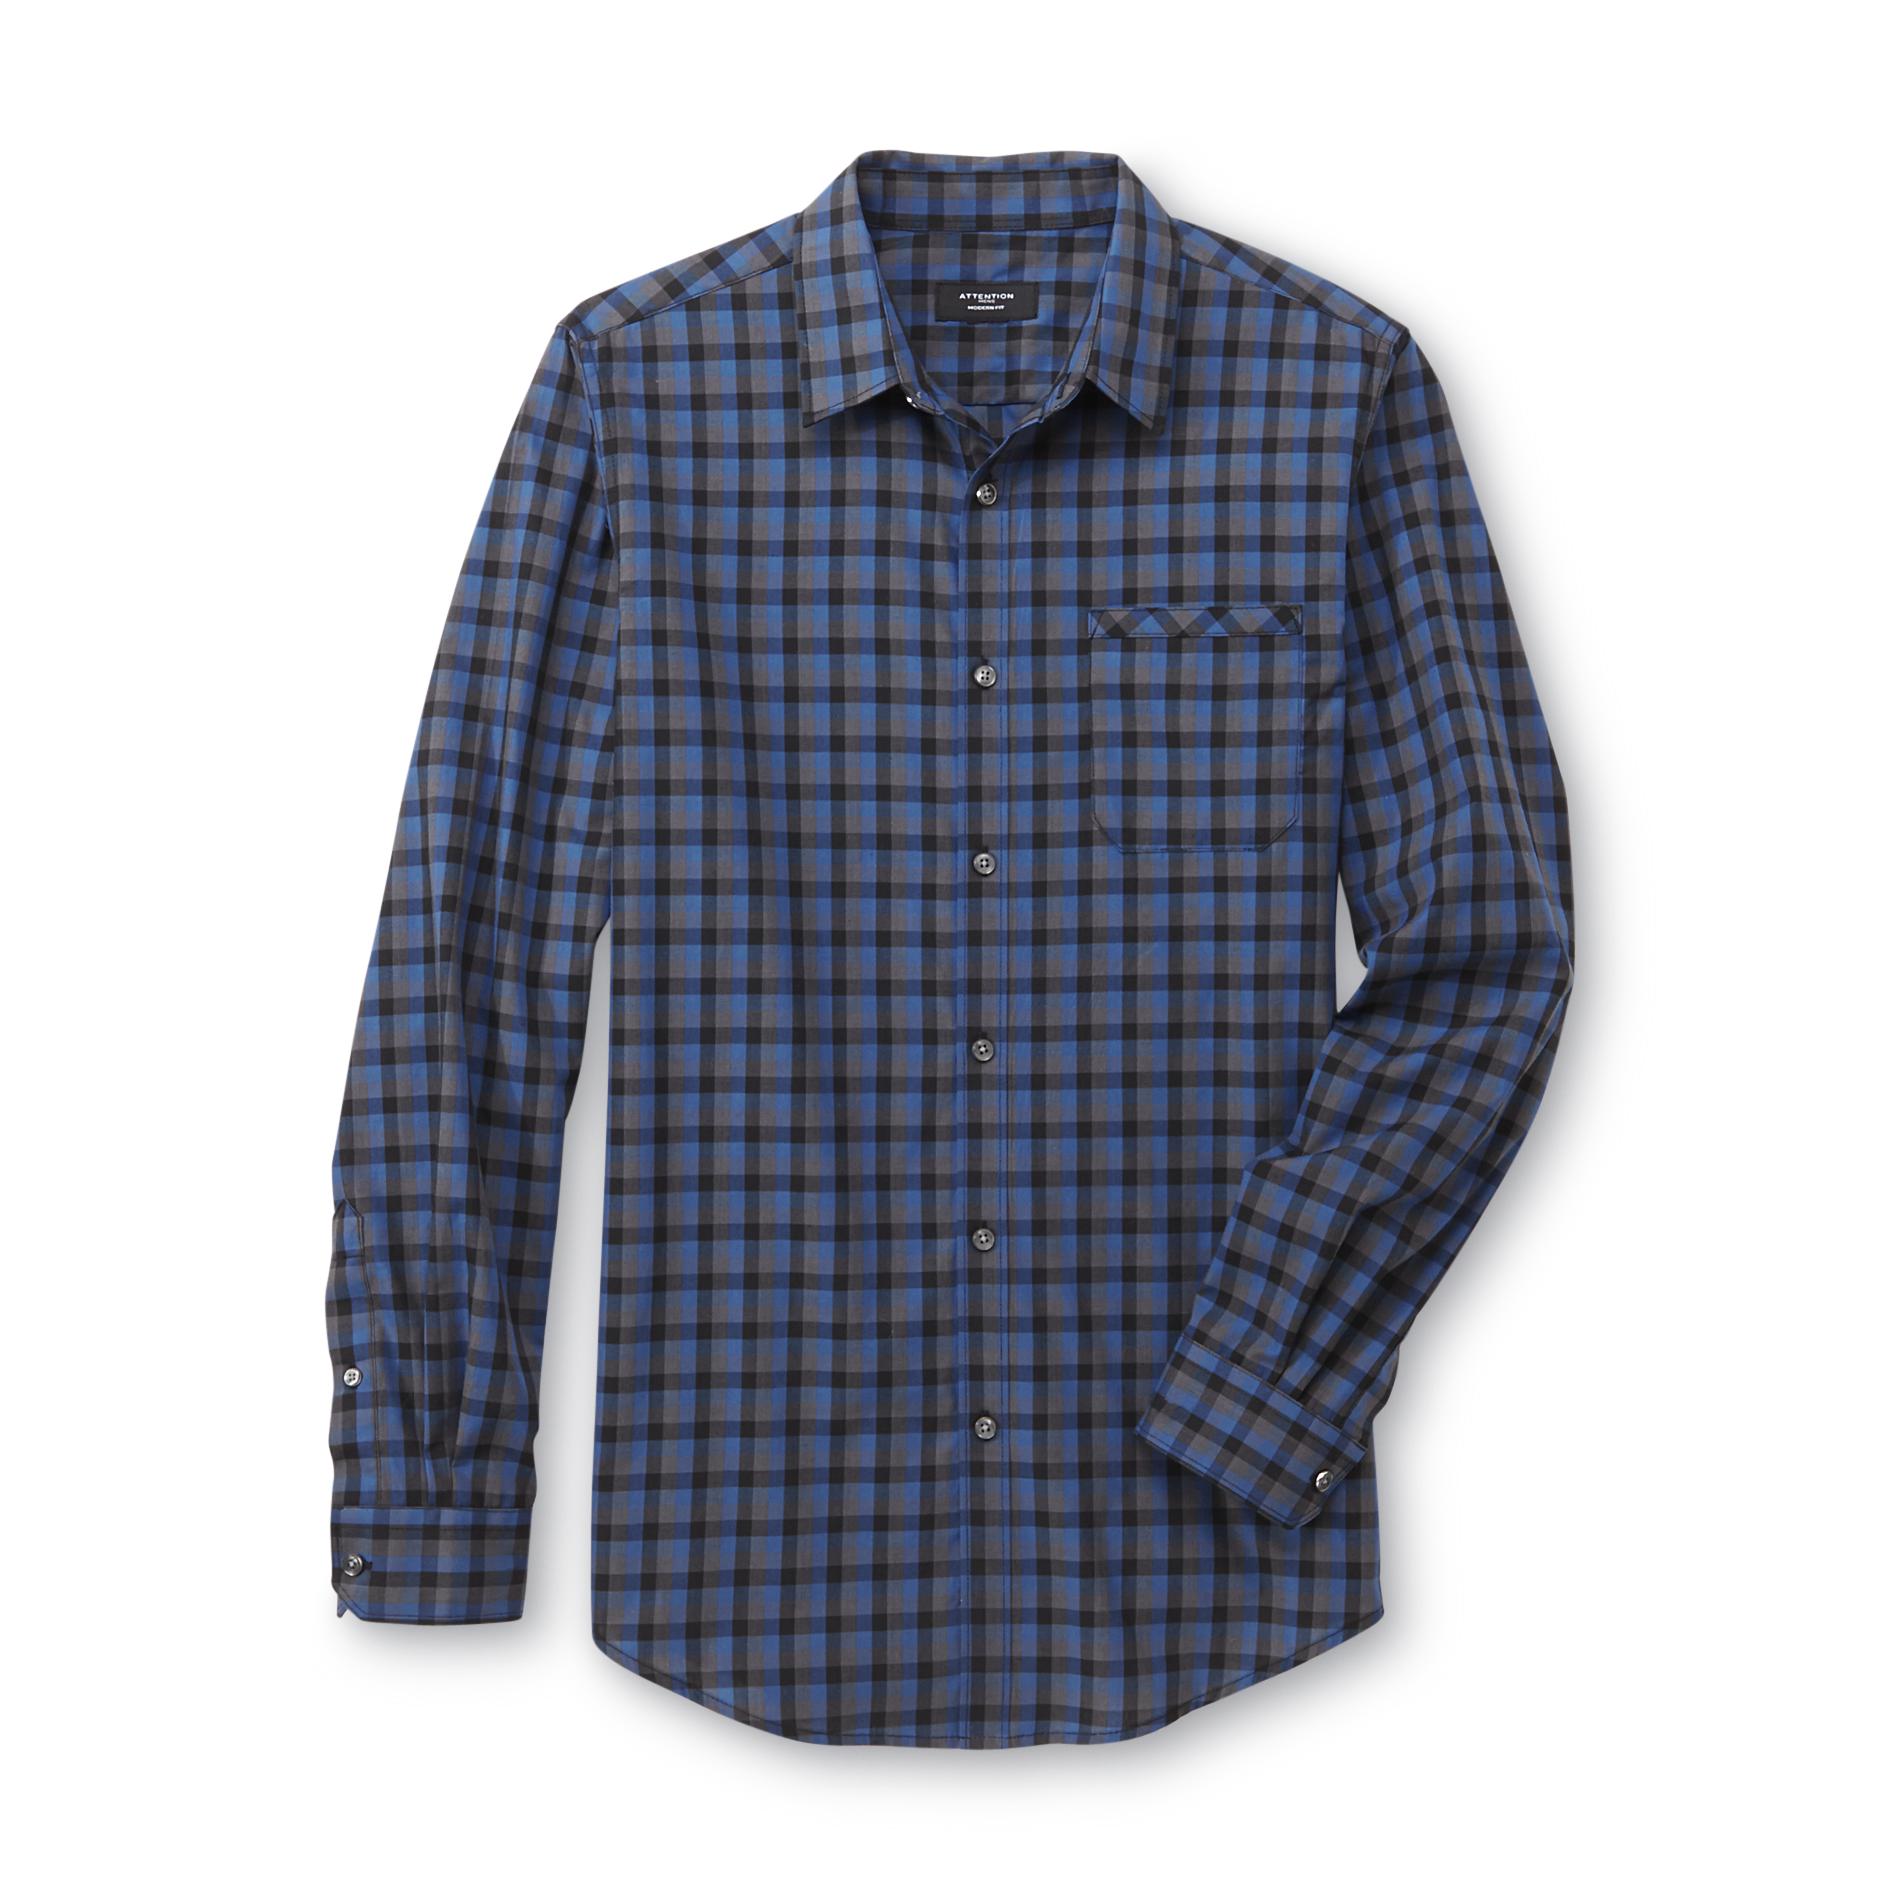 Attention Men's Modern Fit Collared Casual Shirt - Plaid